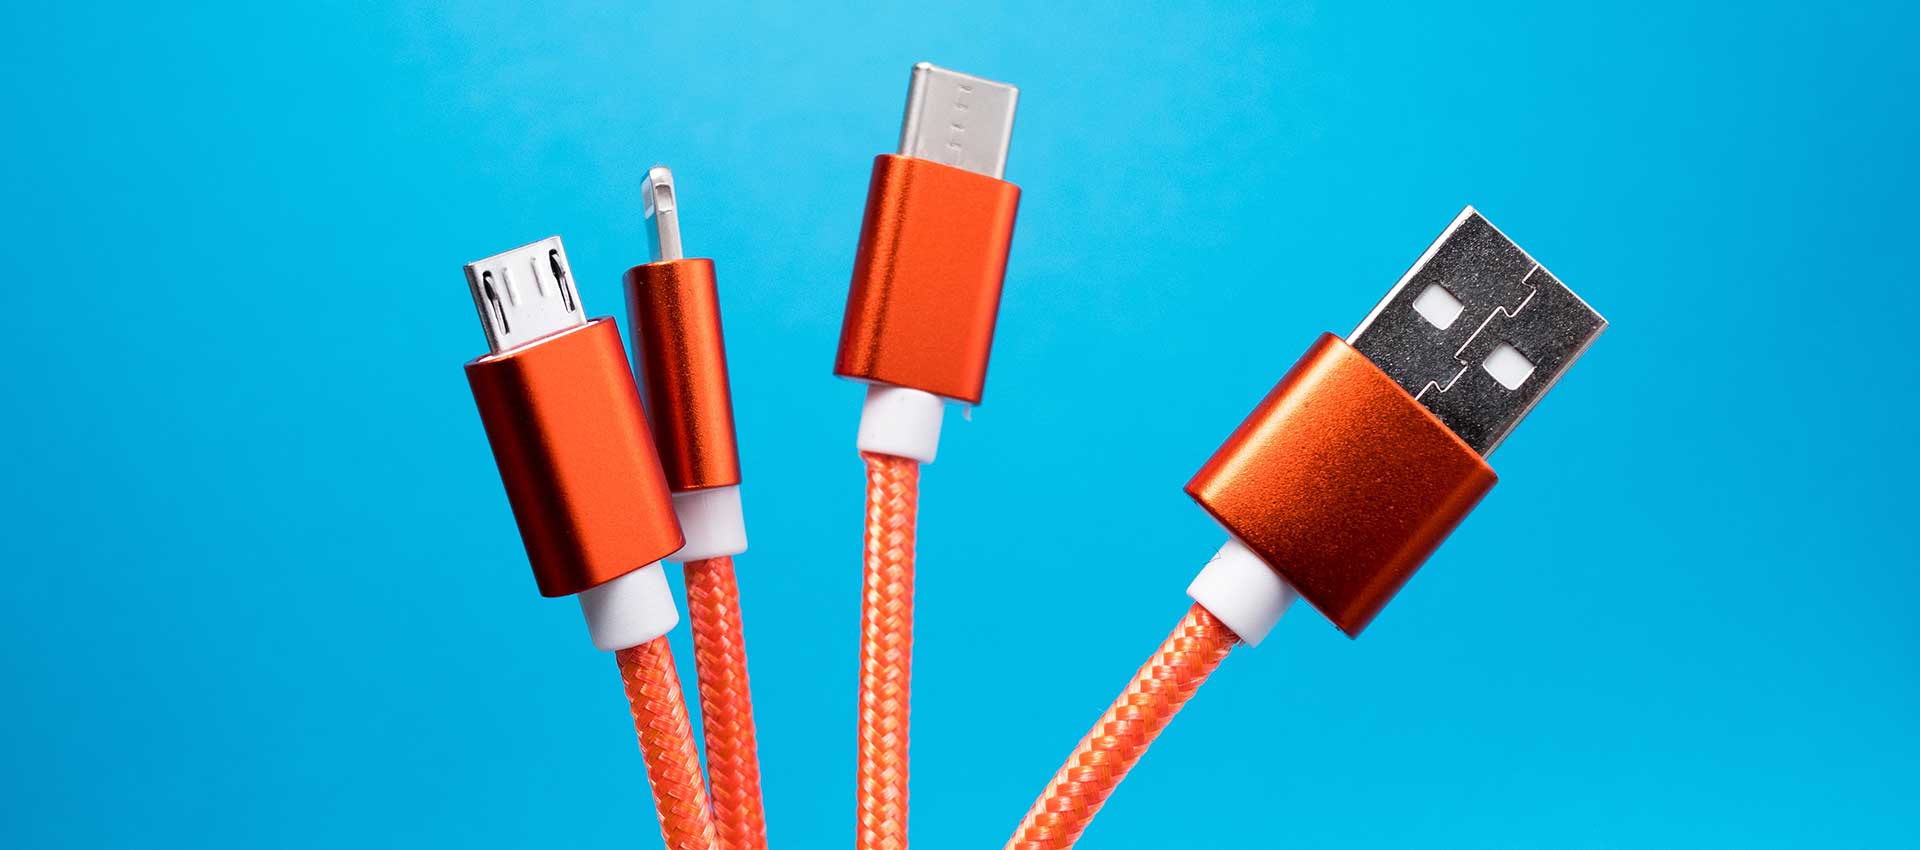 Charger Cables – Latest And Fast Charging At A Reasonable Price In Pakistan